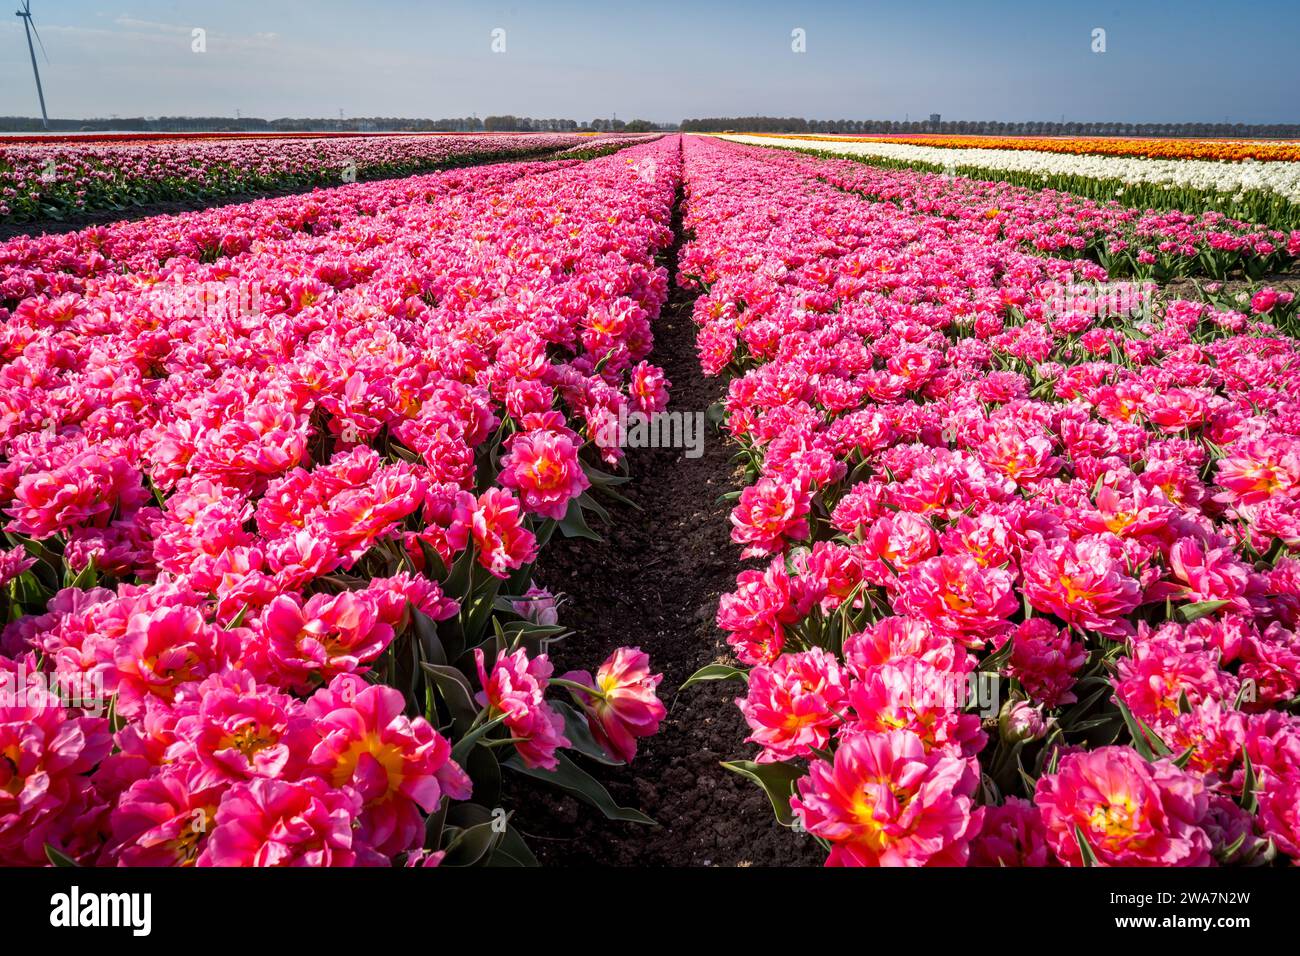 endless field of pink tulips Stock Photo